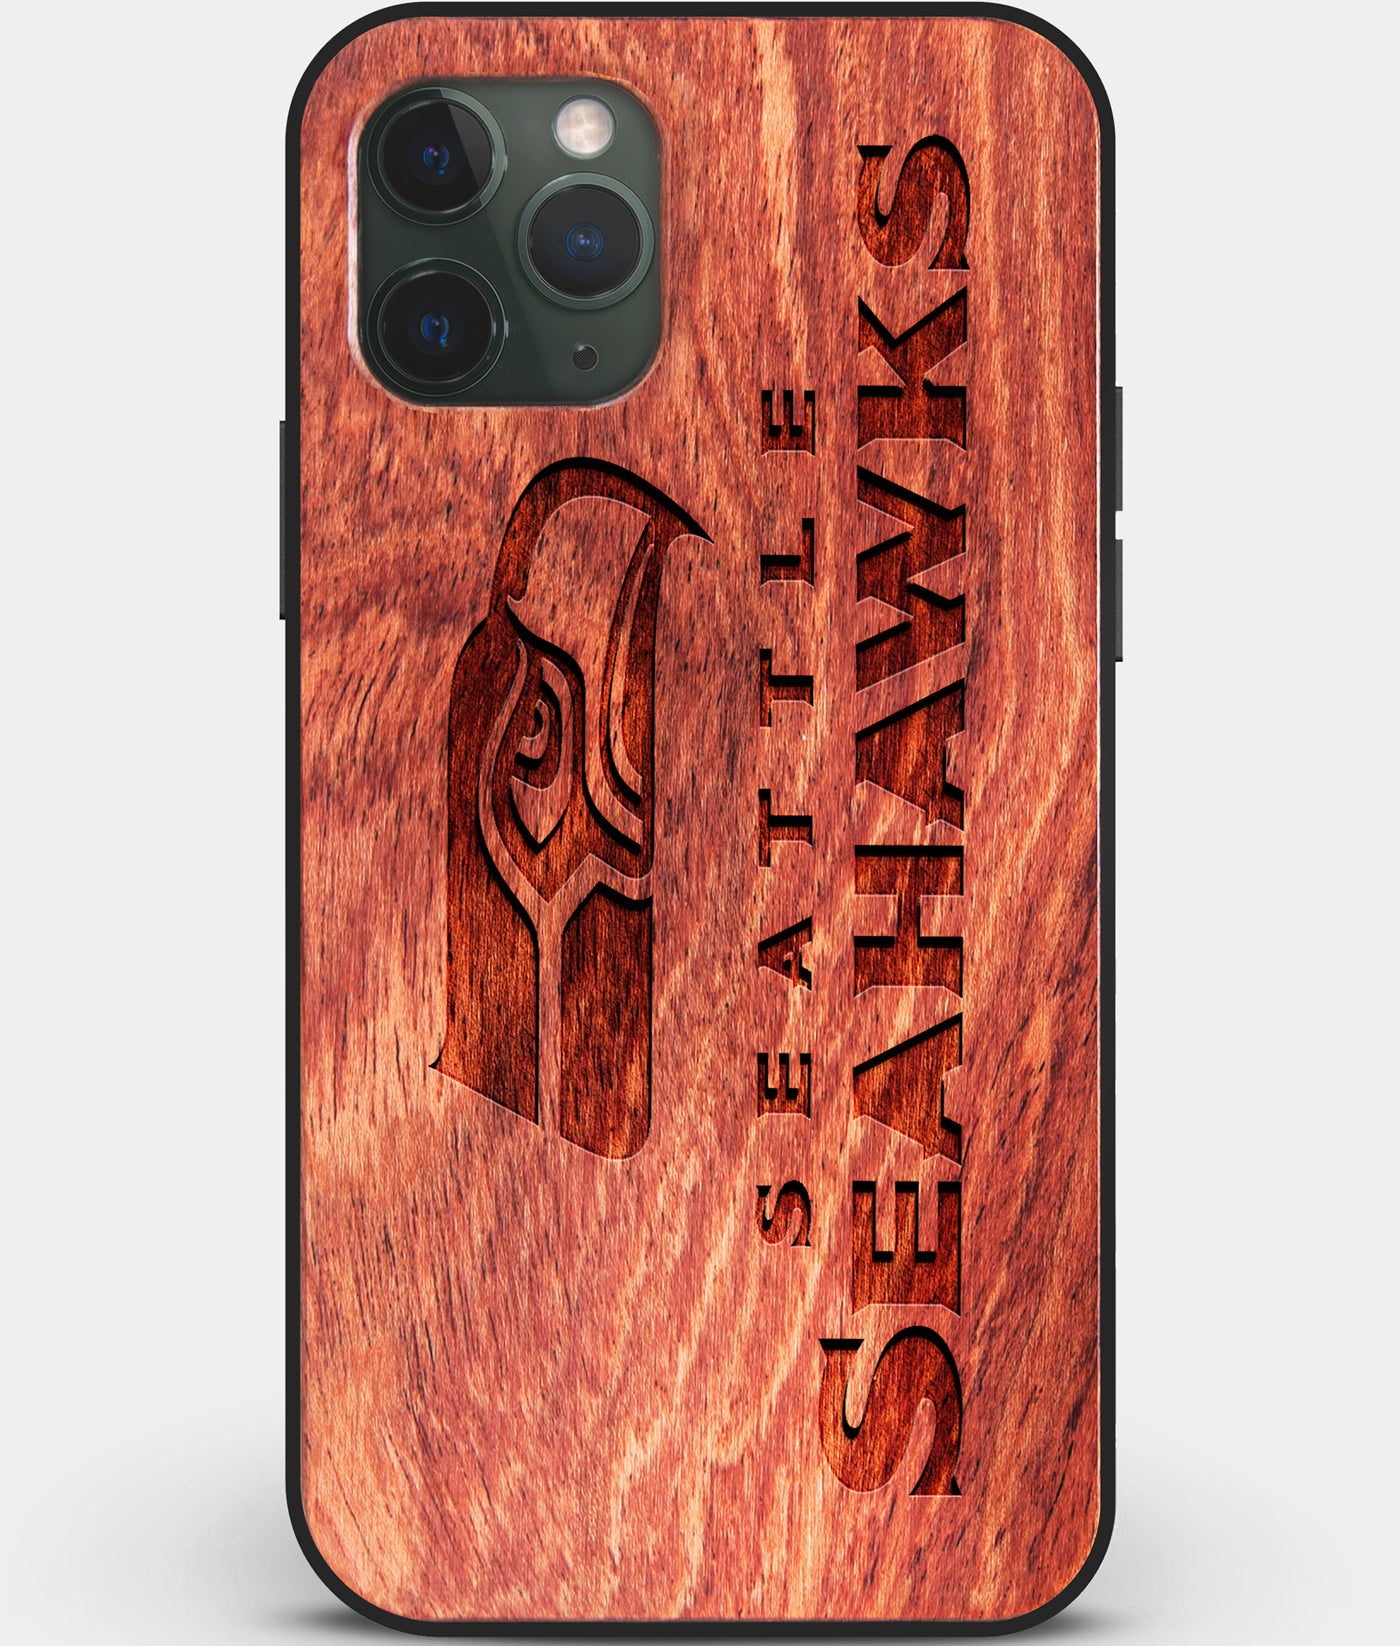 Custom Carved Wood Seattle Seahawks iPhone 11 Pro Case | Personalized Mahogany Wood Seattle Seahawks Cover, Birthday Gift, Gifts For Him, Monogrammed Gift For Fan | by Engraved In Nature